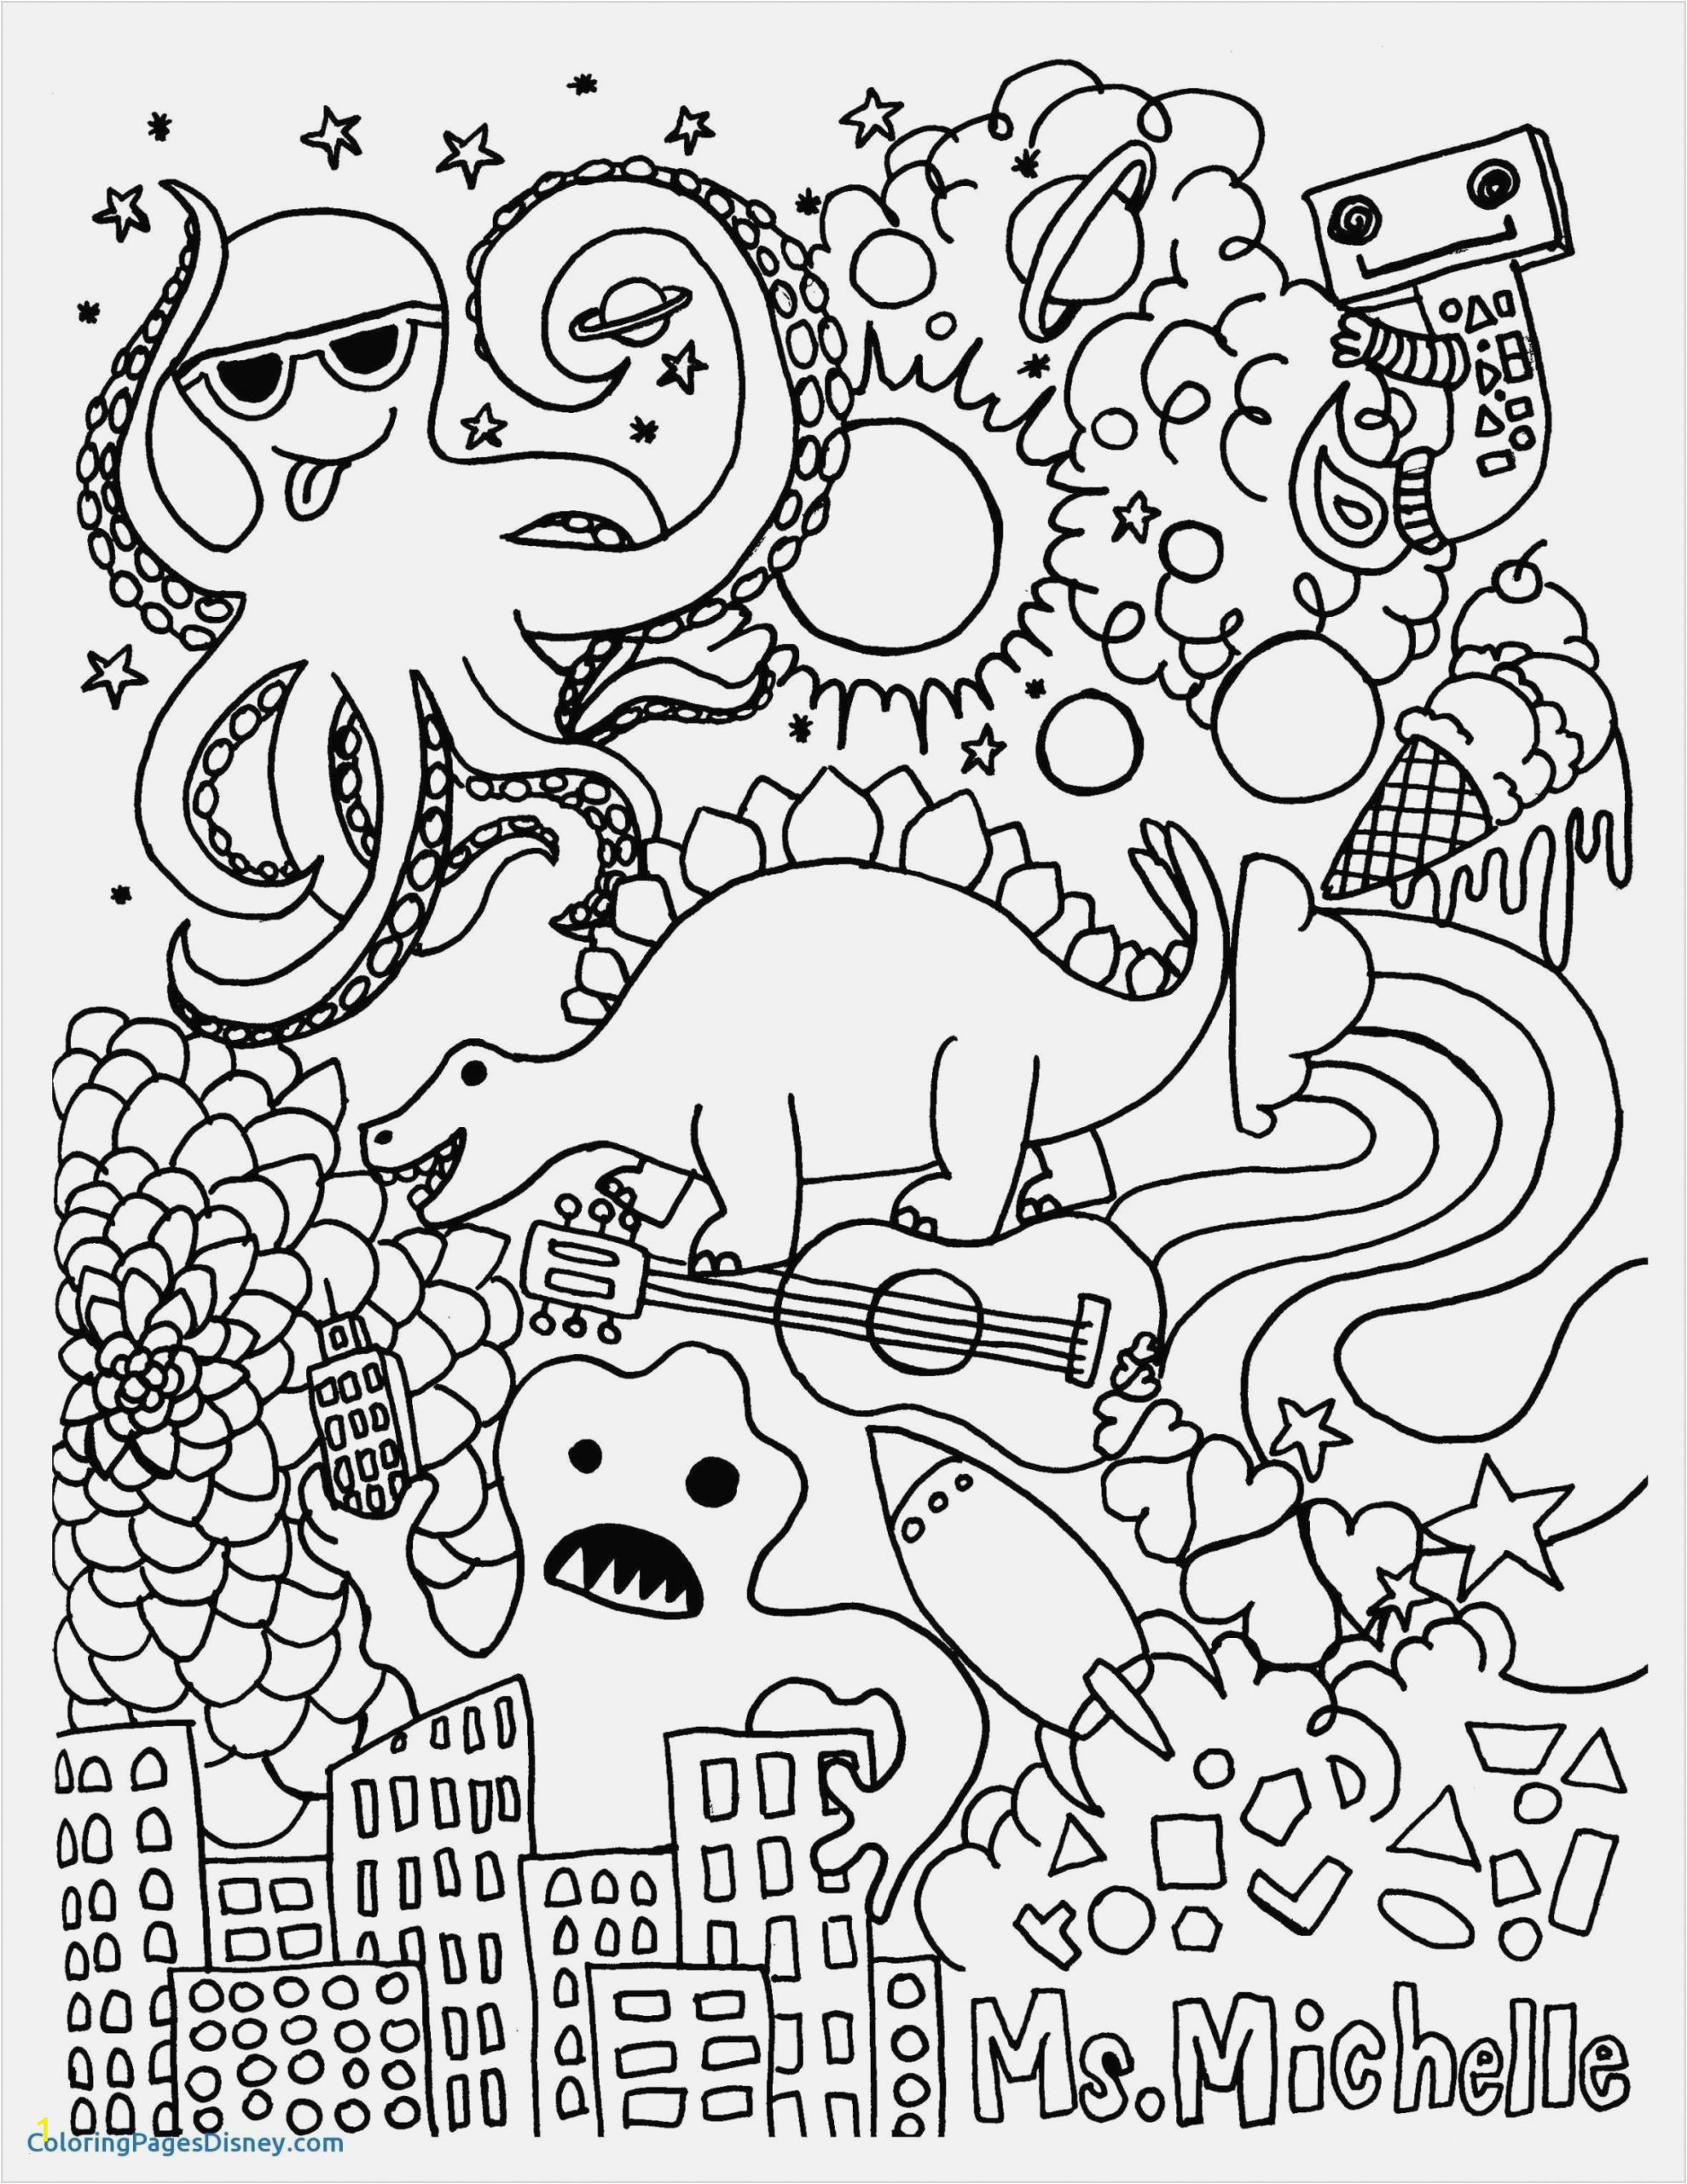 Summer Printable Coloring Pages for Kids Merry Christmas Printable Coloring Pages at Coloring Pages